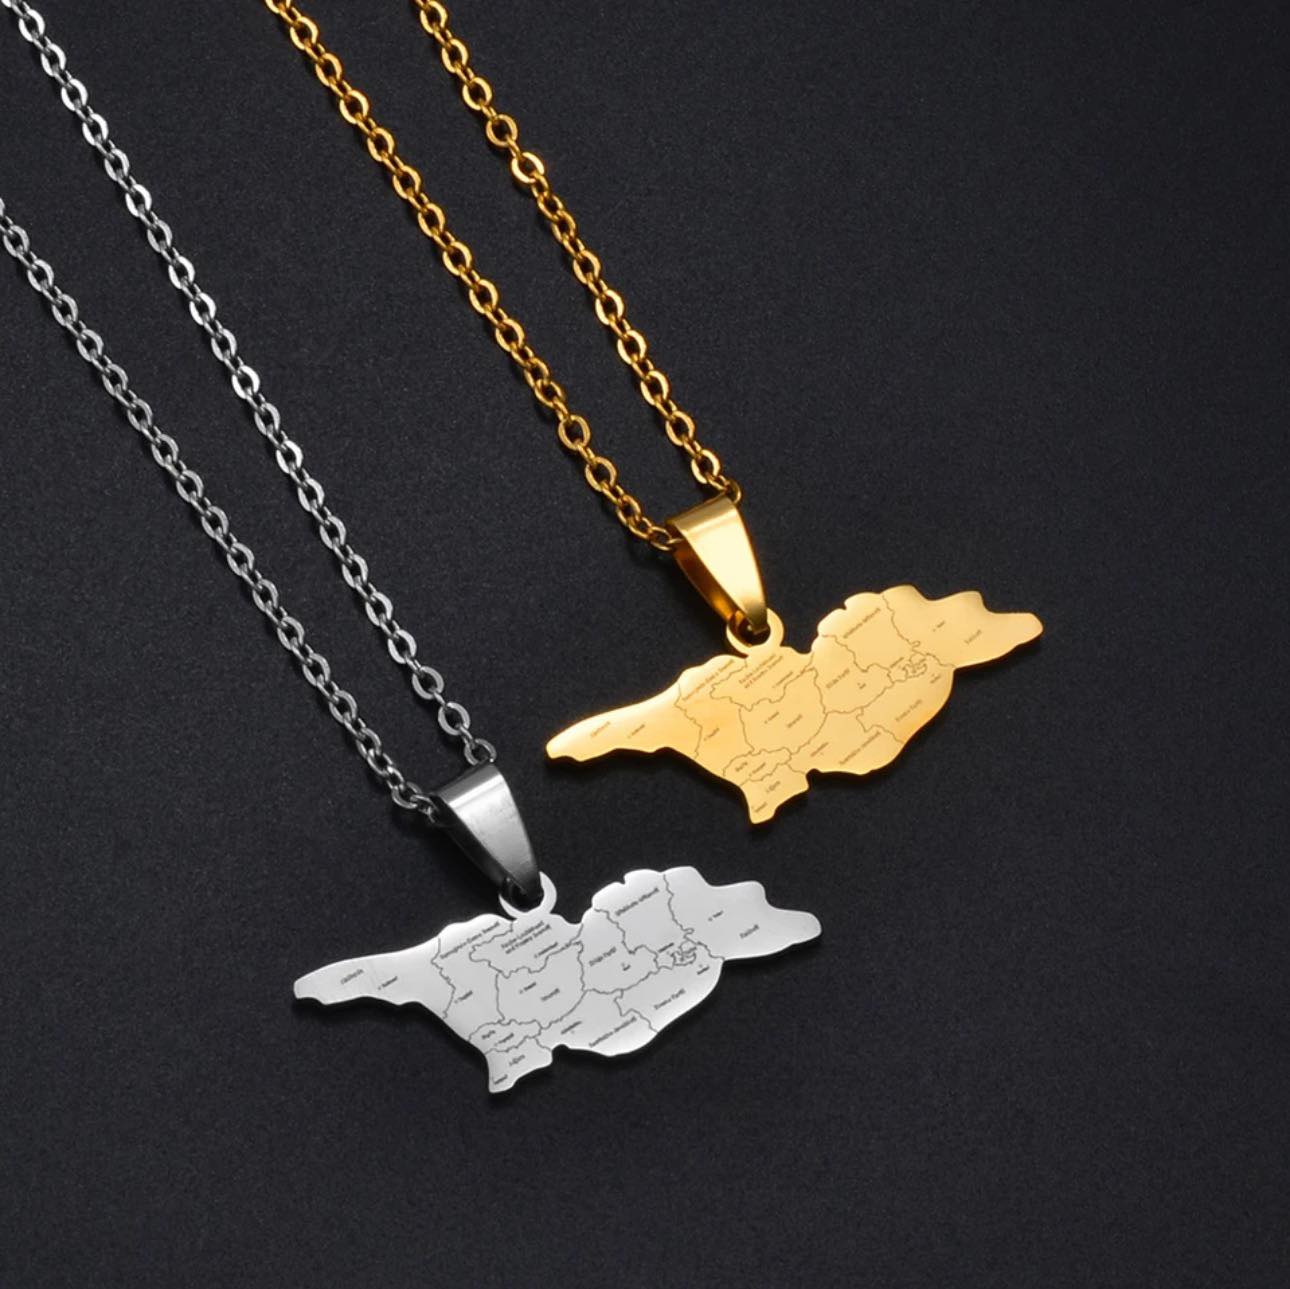 Georgia Map & Cities Necklace